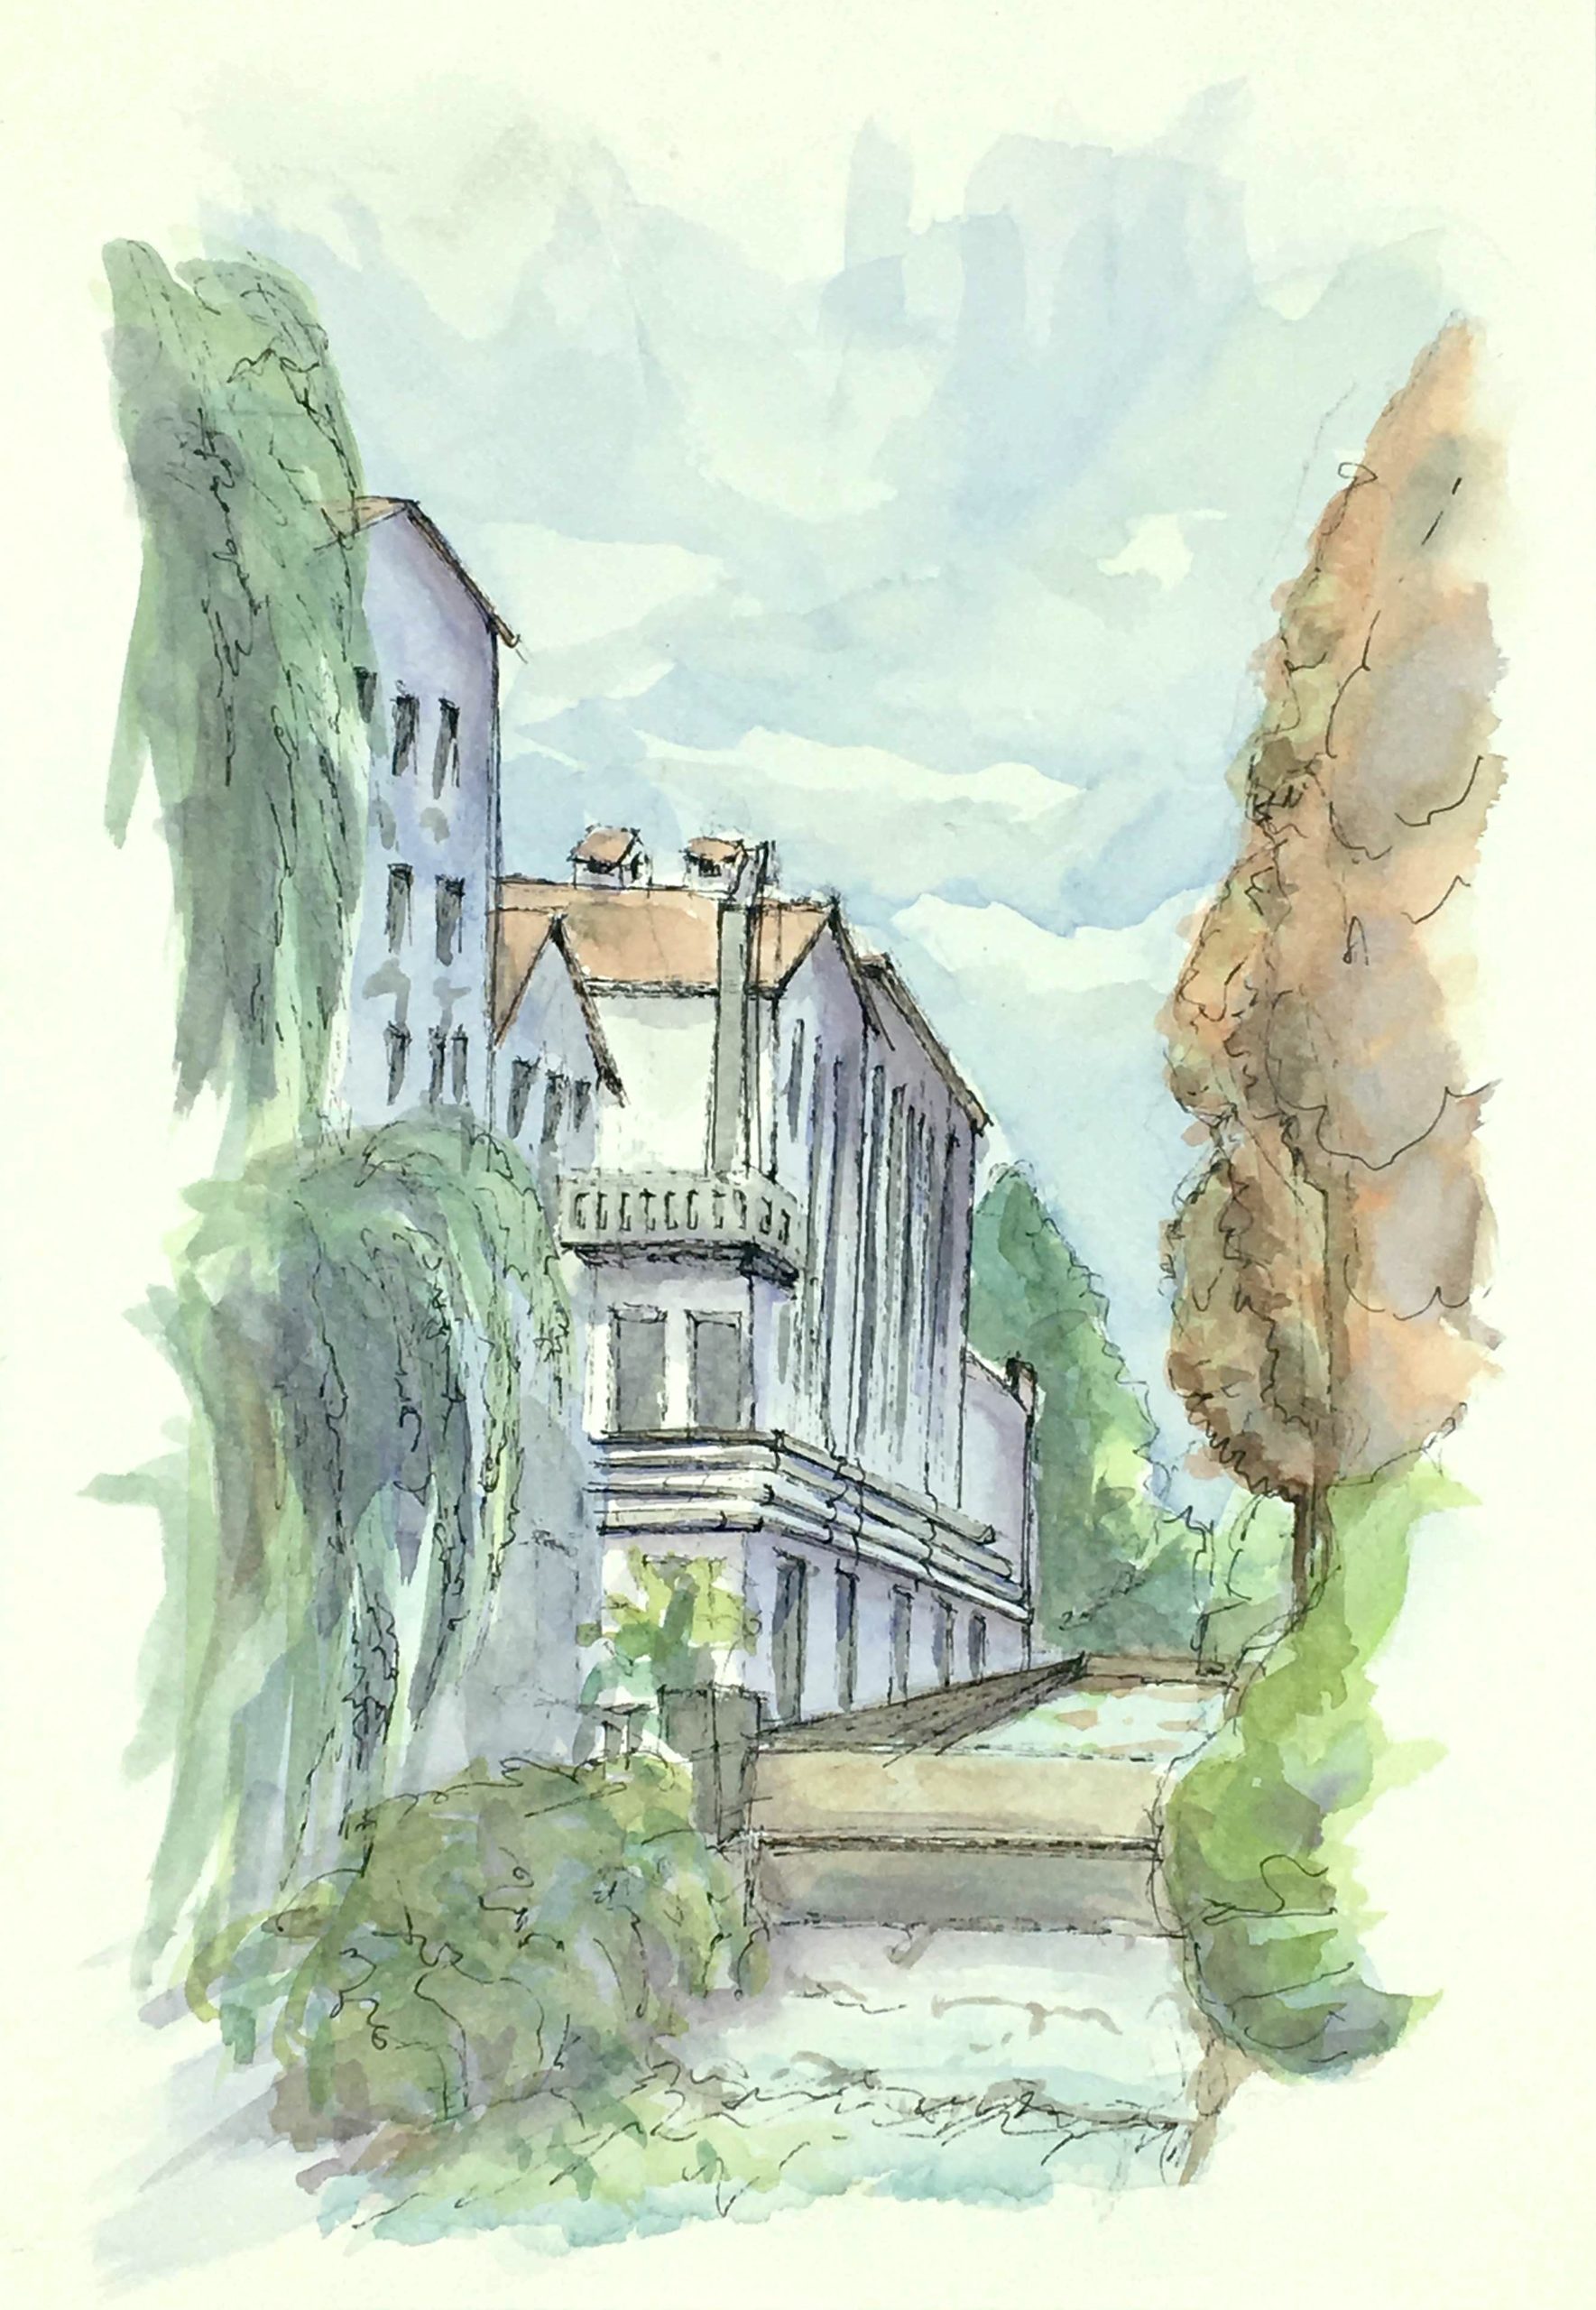 Painting of The old Dormisch brewery in Udine